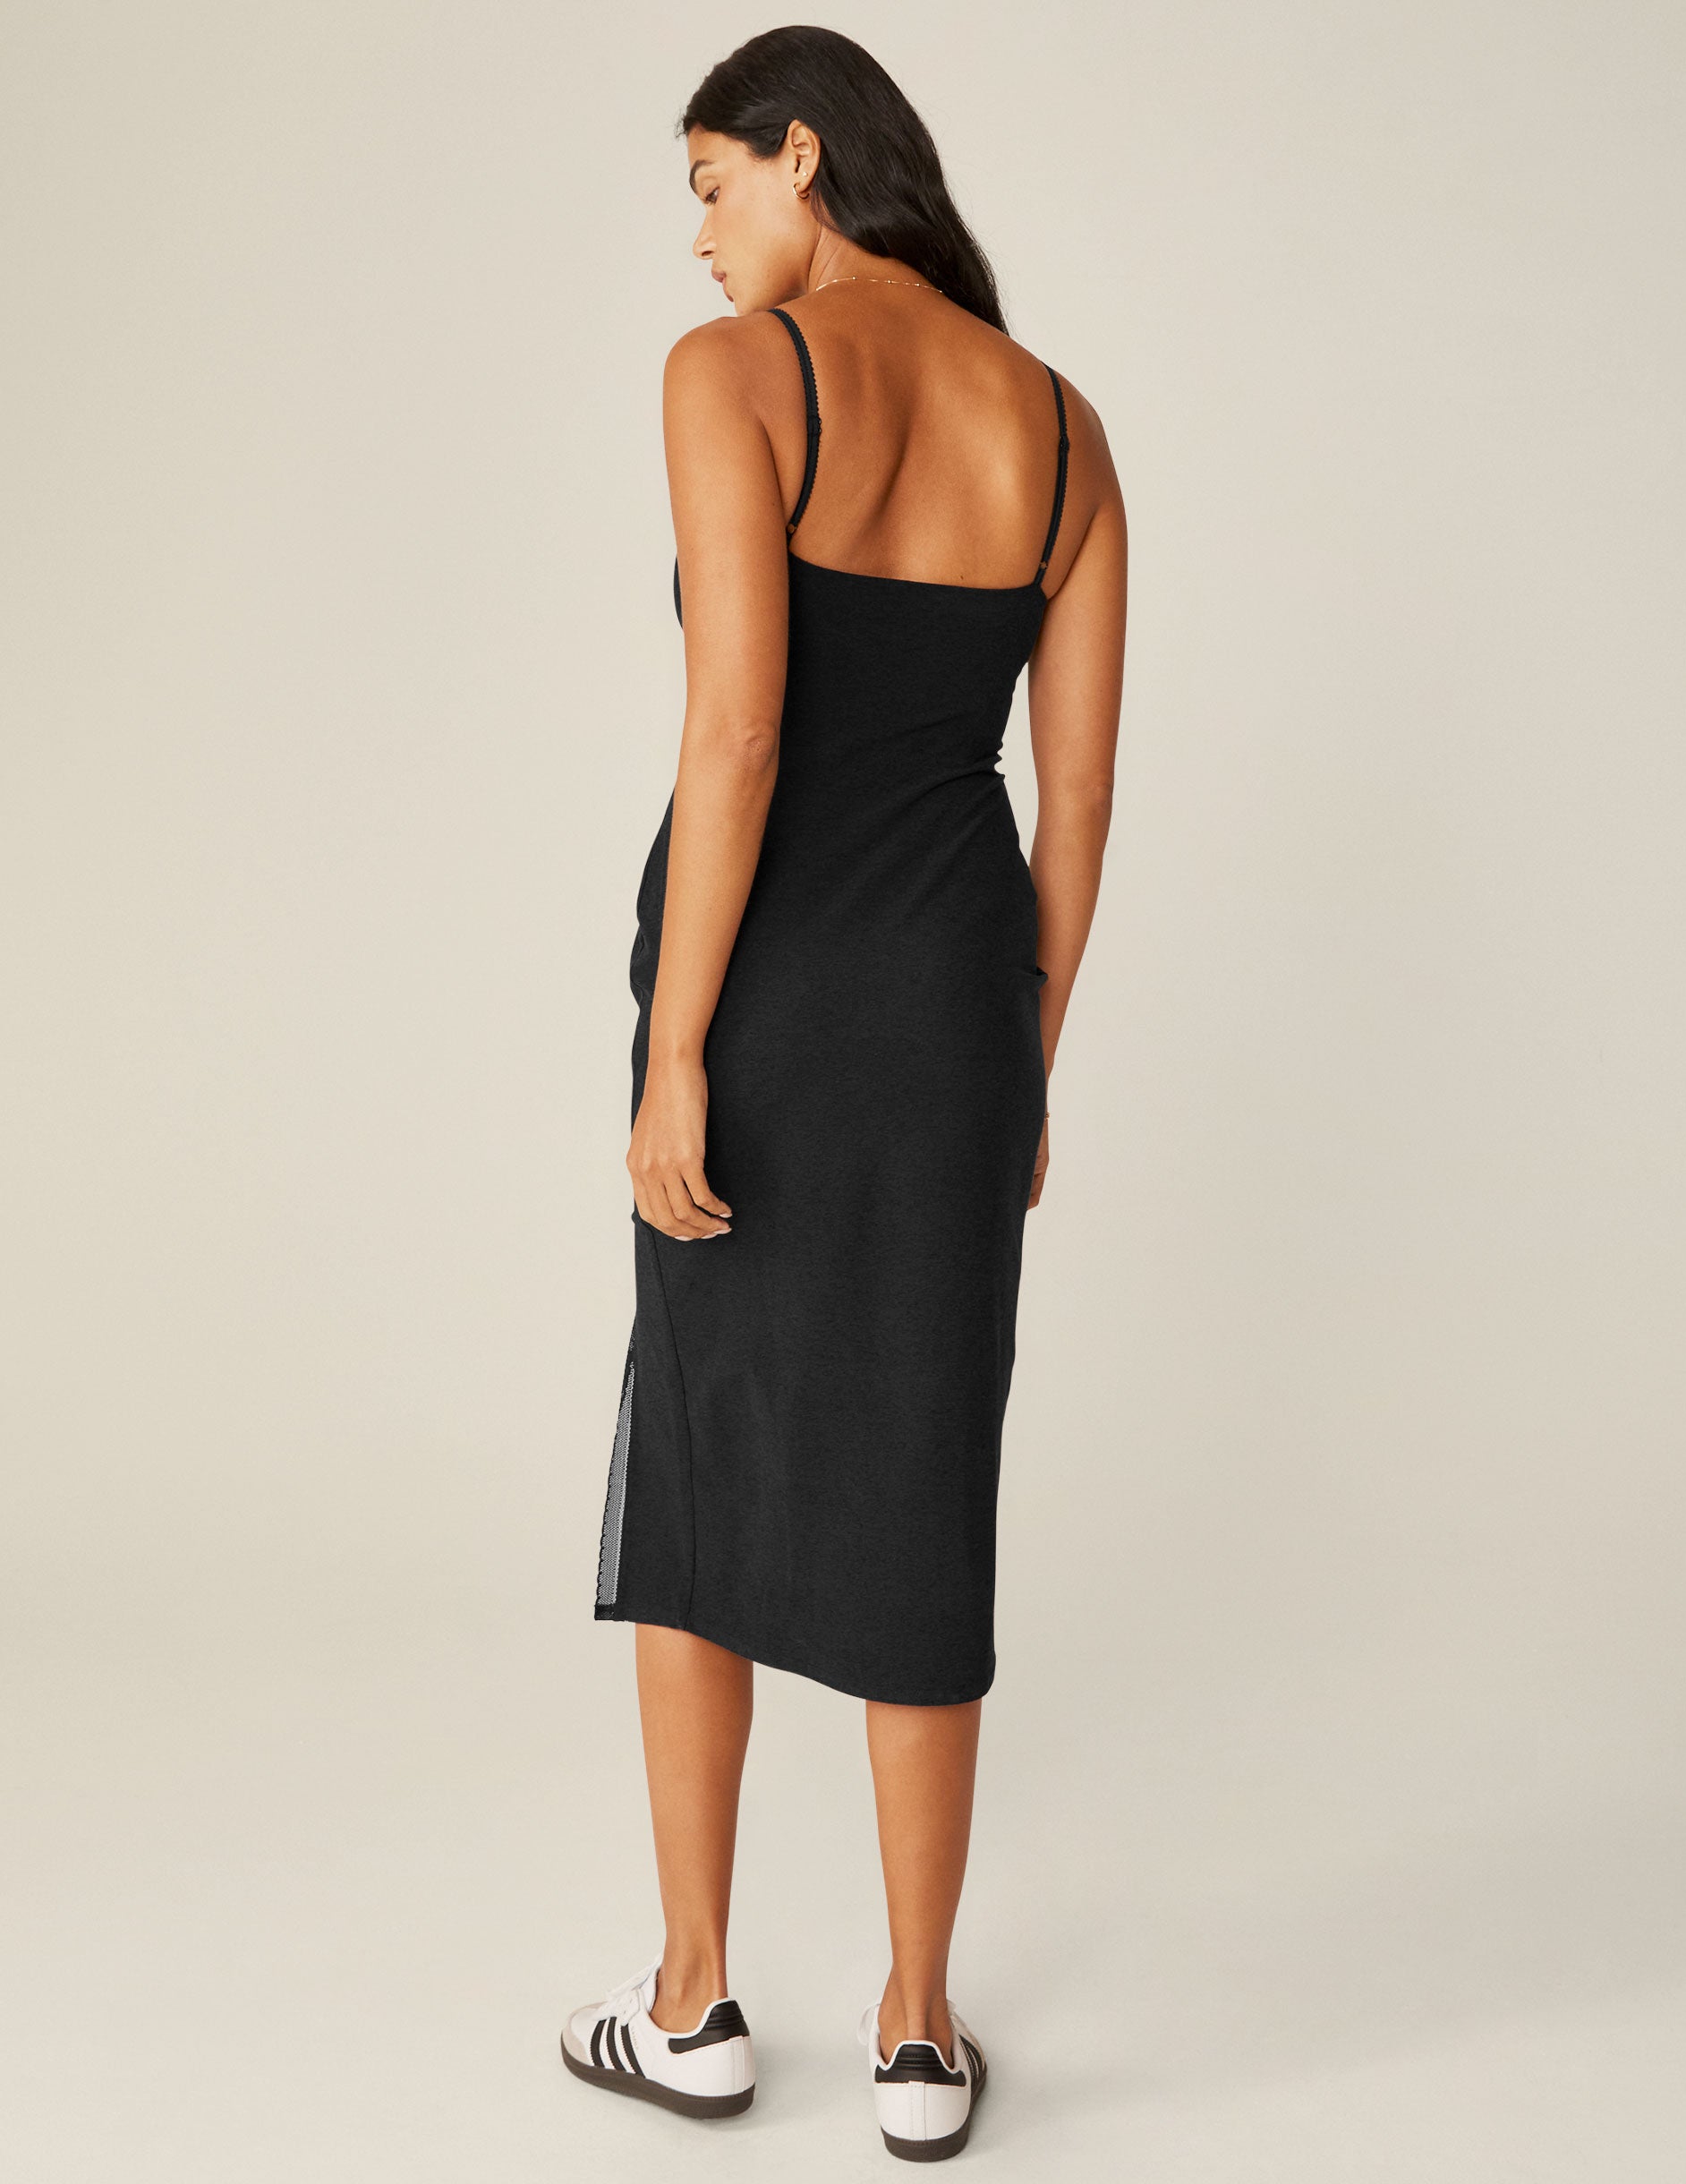 black spaghetti strap midi dress with a front side slit and lace trim.